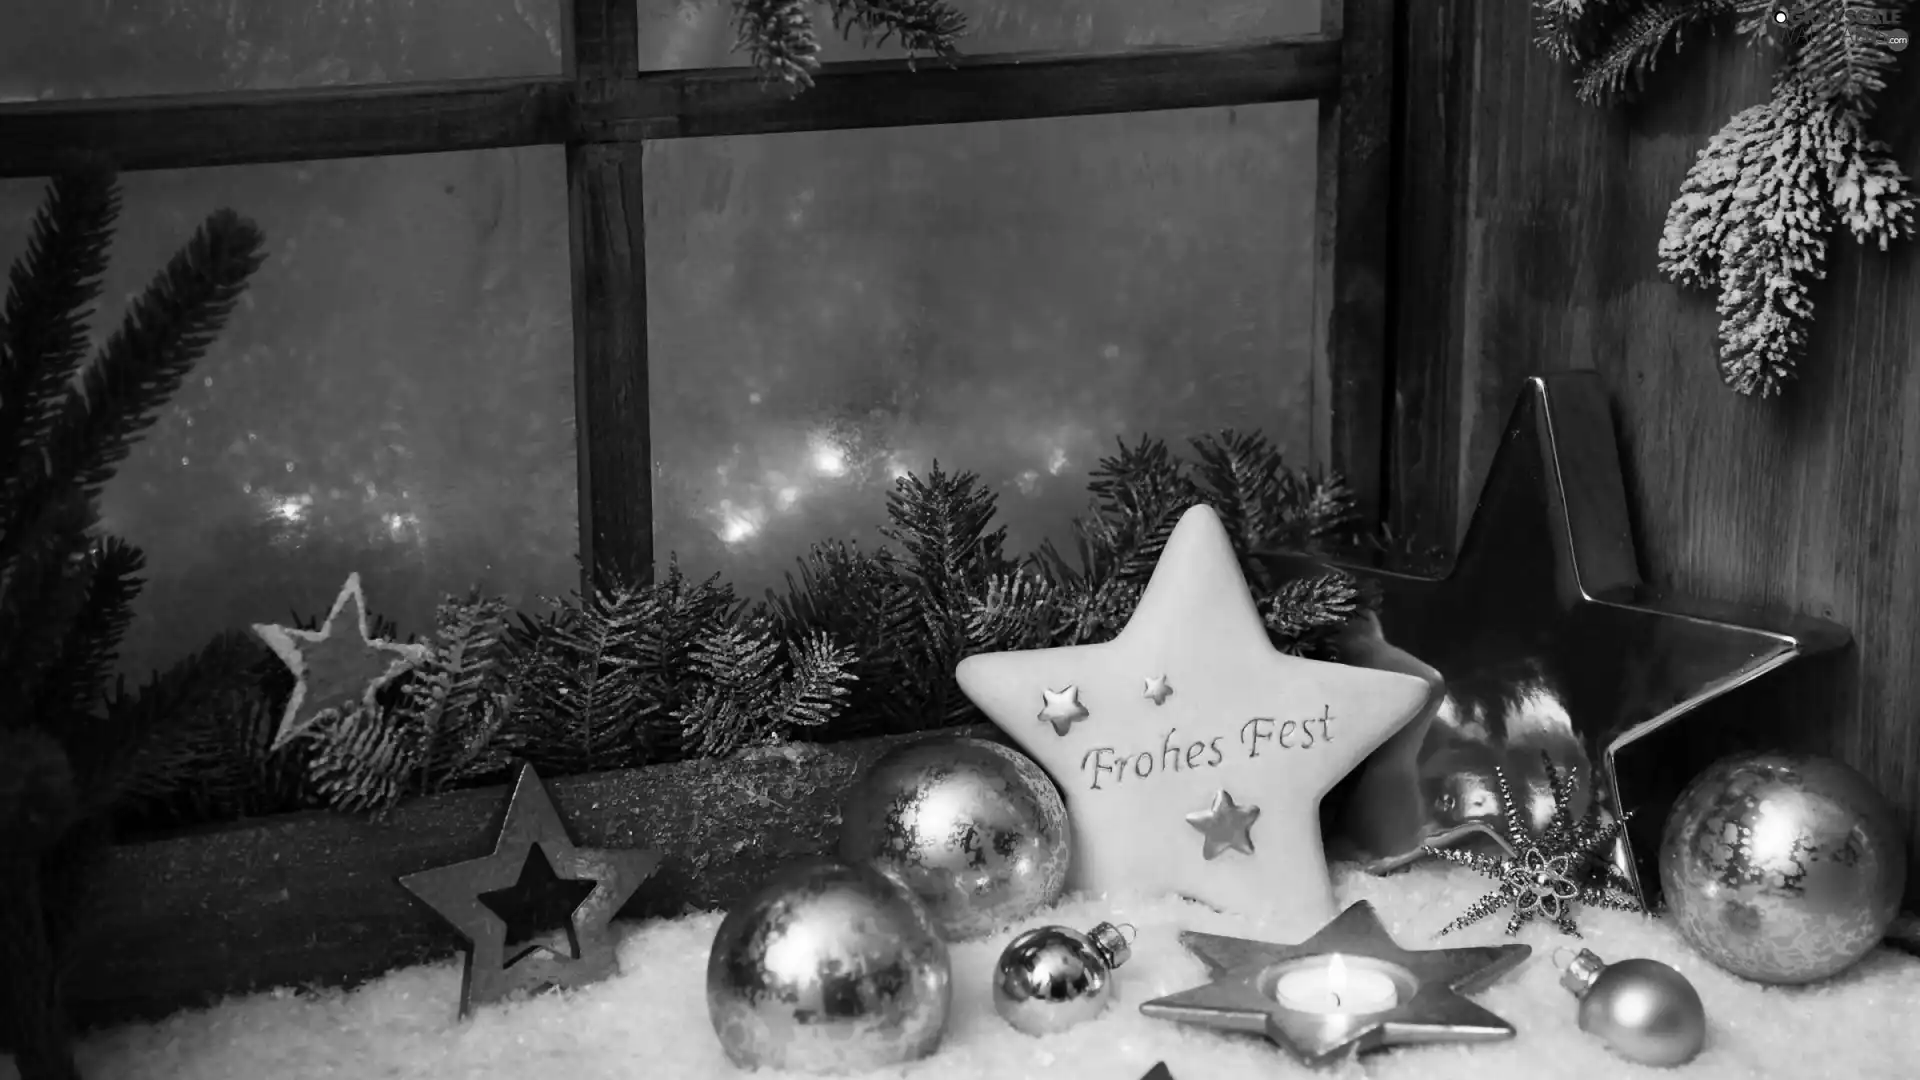 Stars, spruce, Window, composition, Candle, baubles